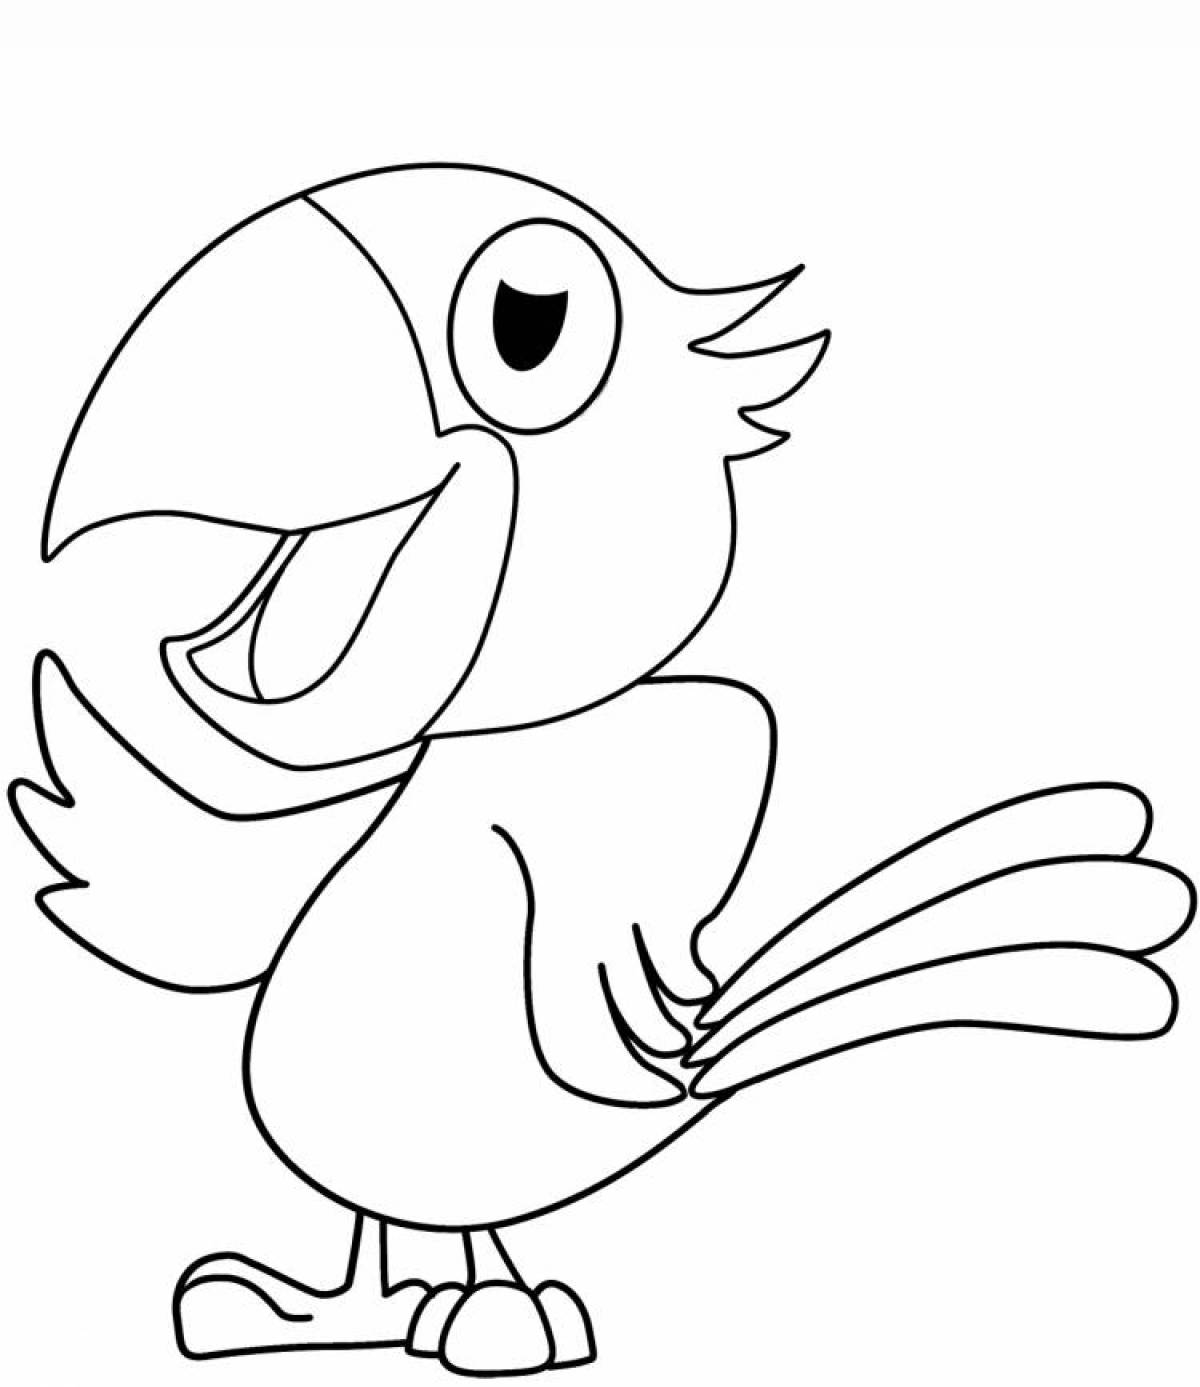 Fun coloring book parrot for kids